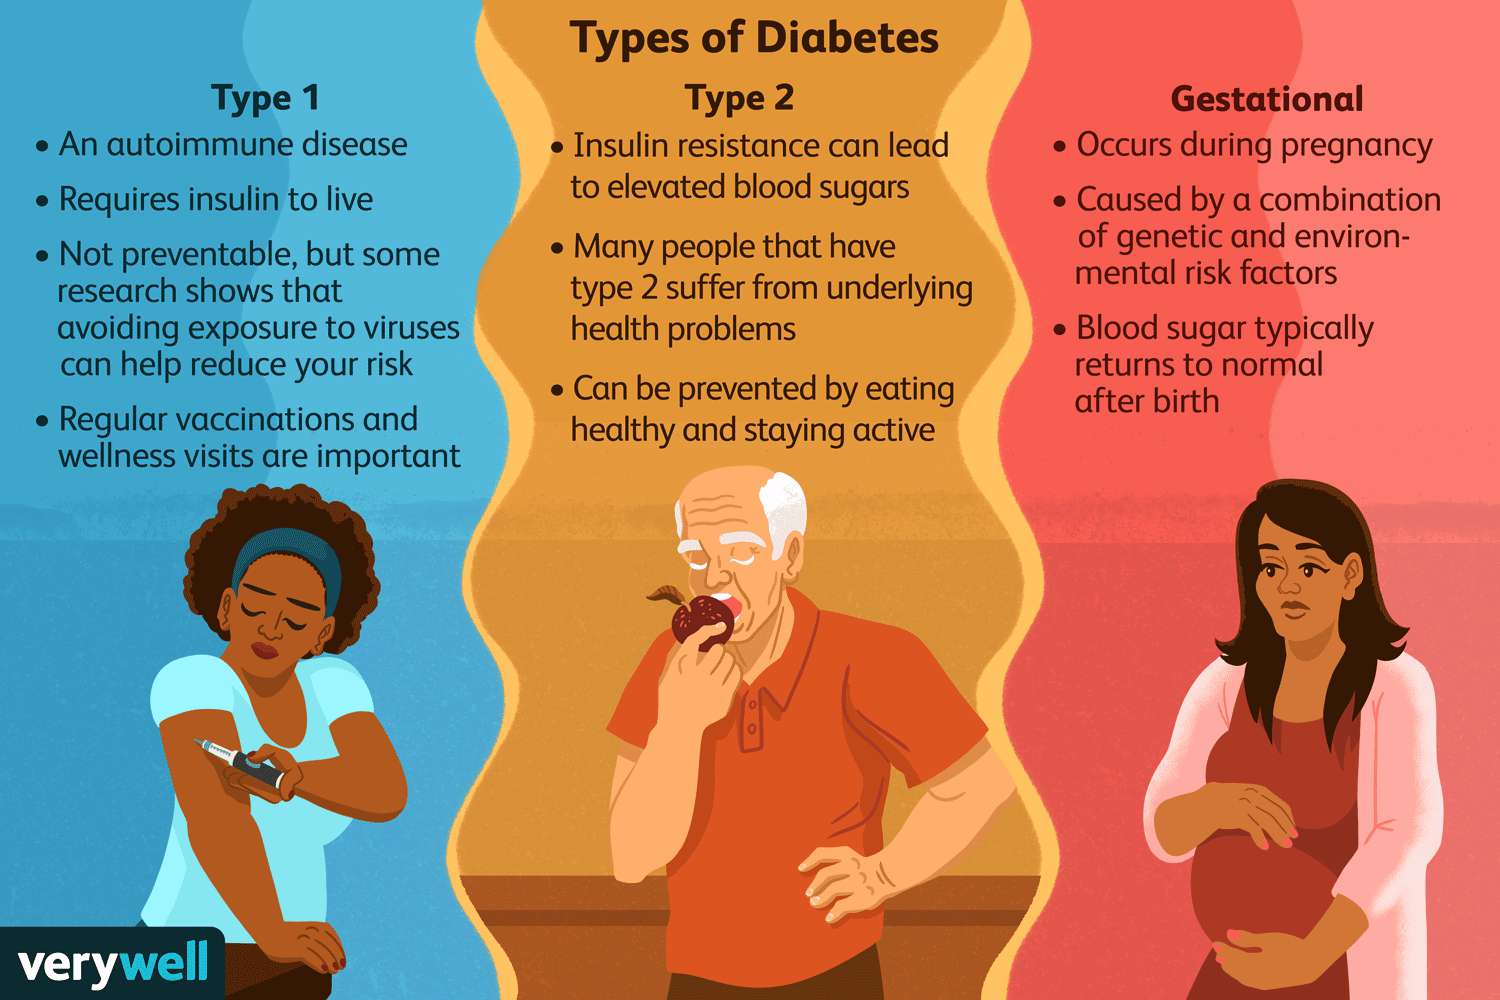 How Many Types of Diabetes are There 17 2bc36158db3b46aa8976e7a0b8c4717d 2bc36158db3b46aa8976e7a0b8c4717d